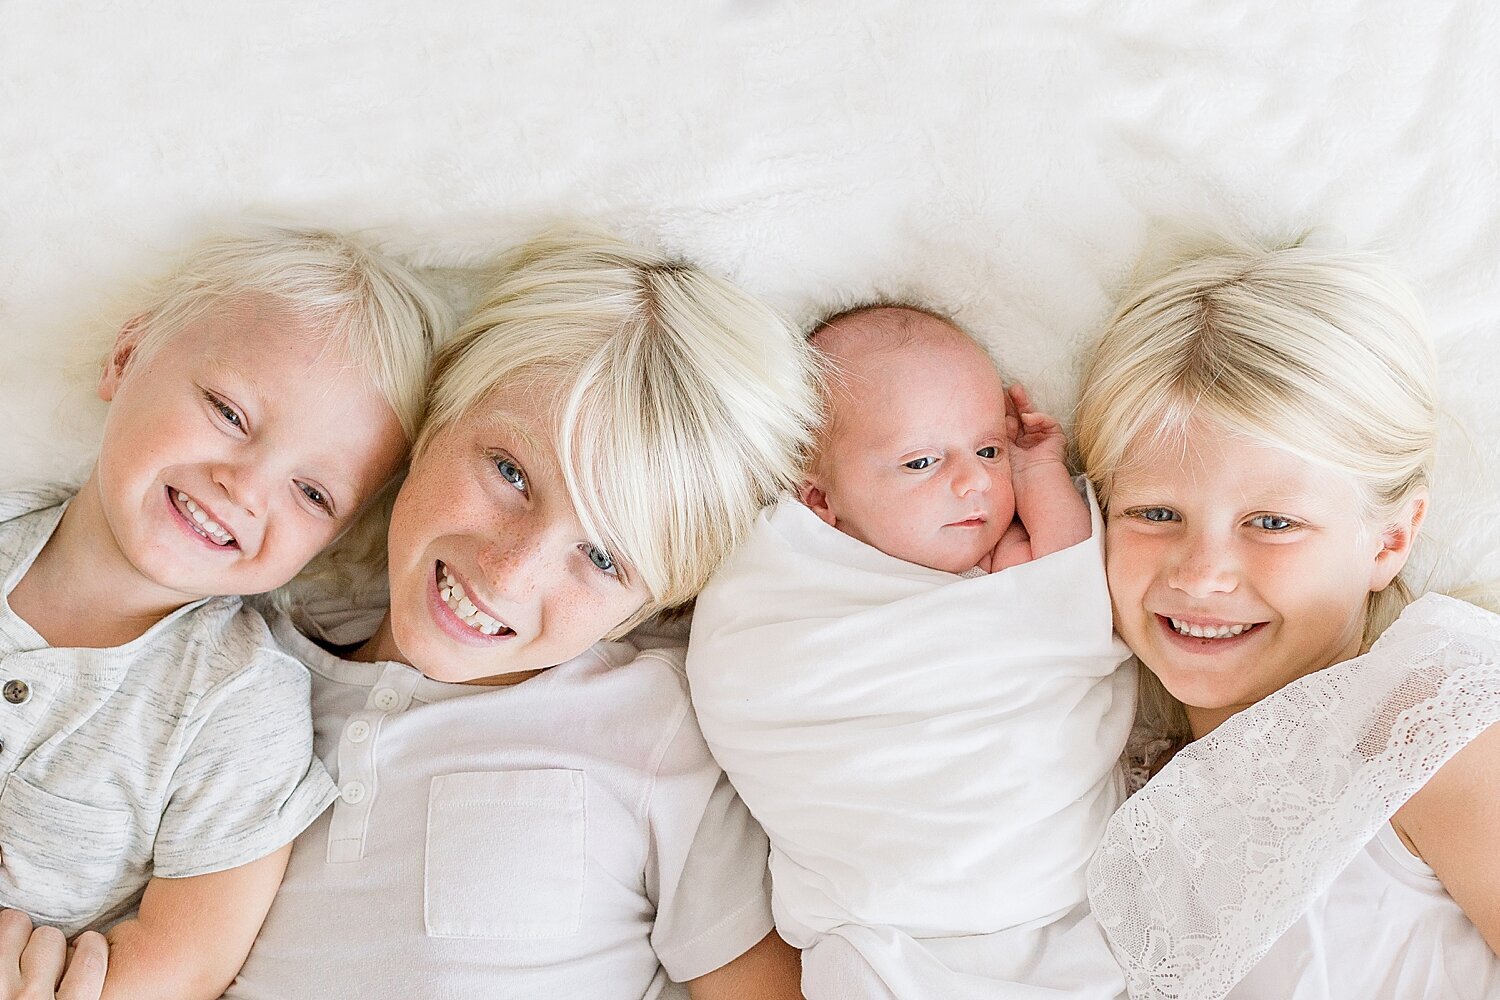 Sibling photo of 3 older siblings and newborn baby boy. Photos by Ambre Williams Photography.